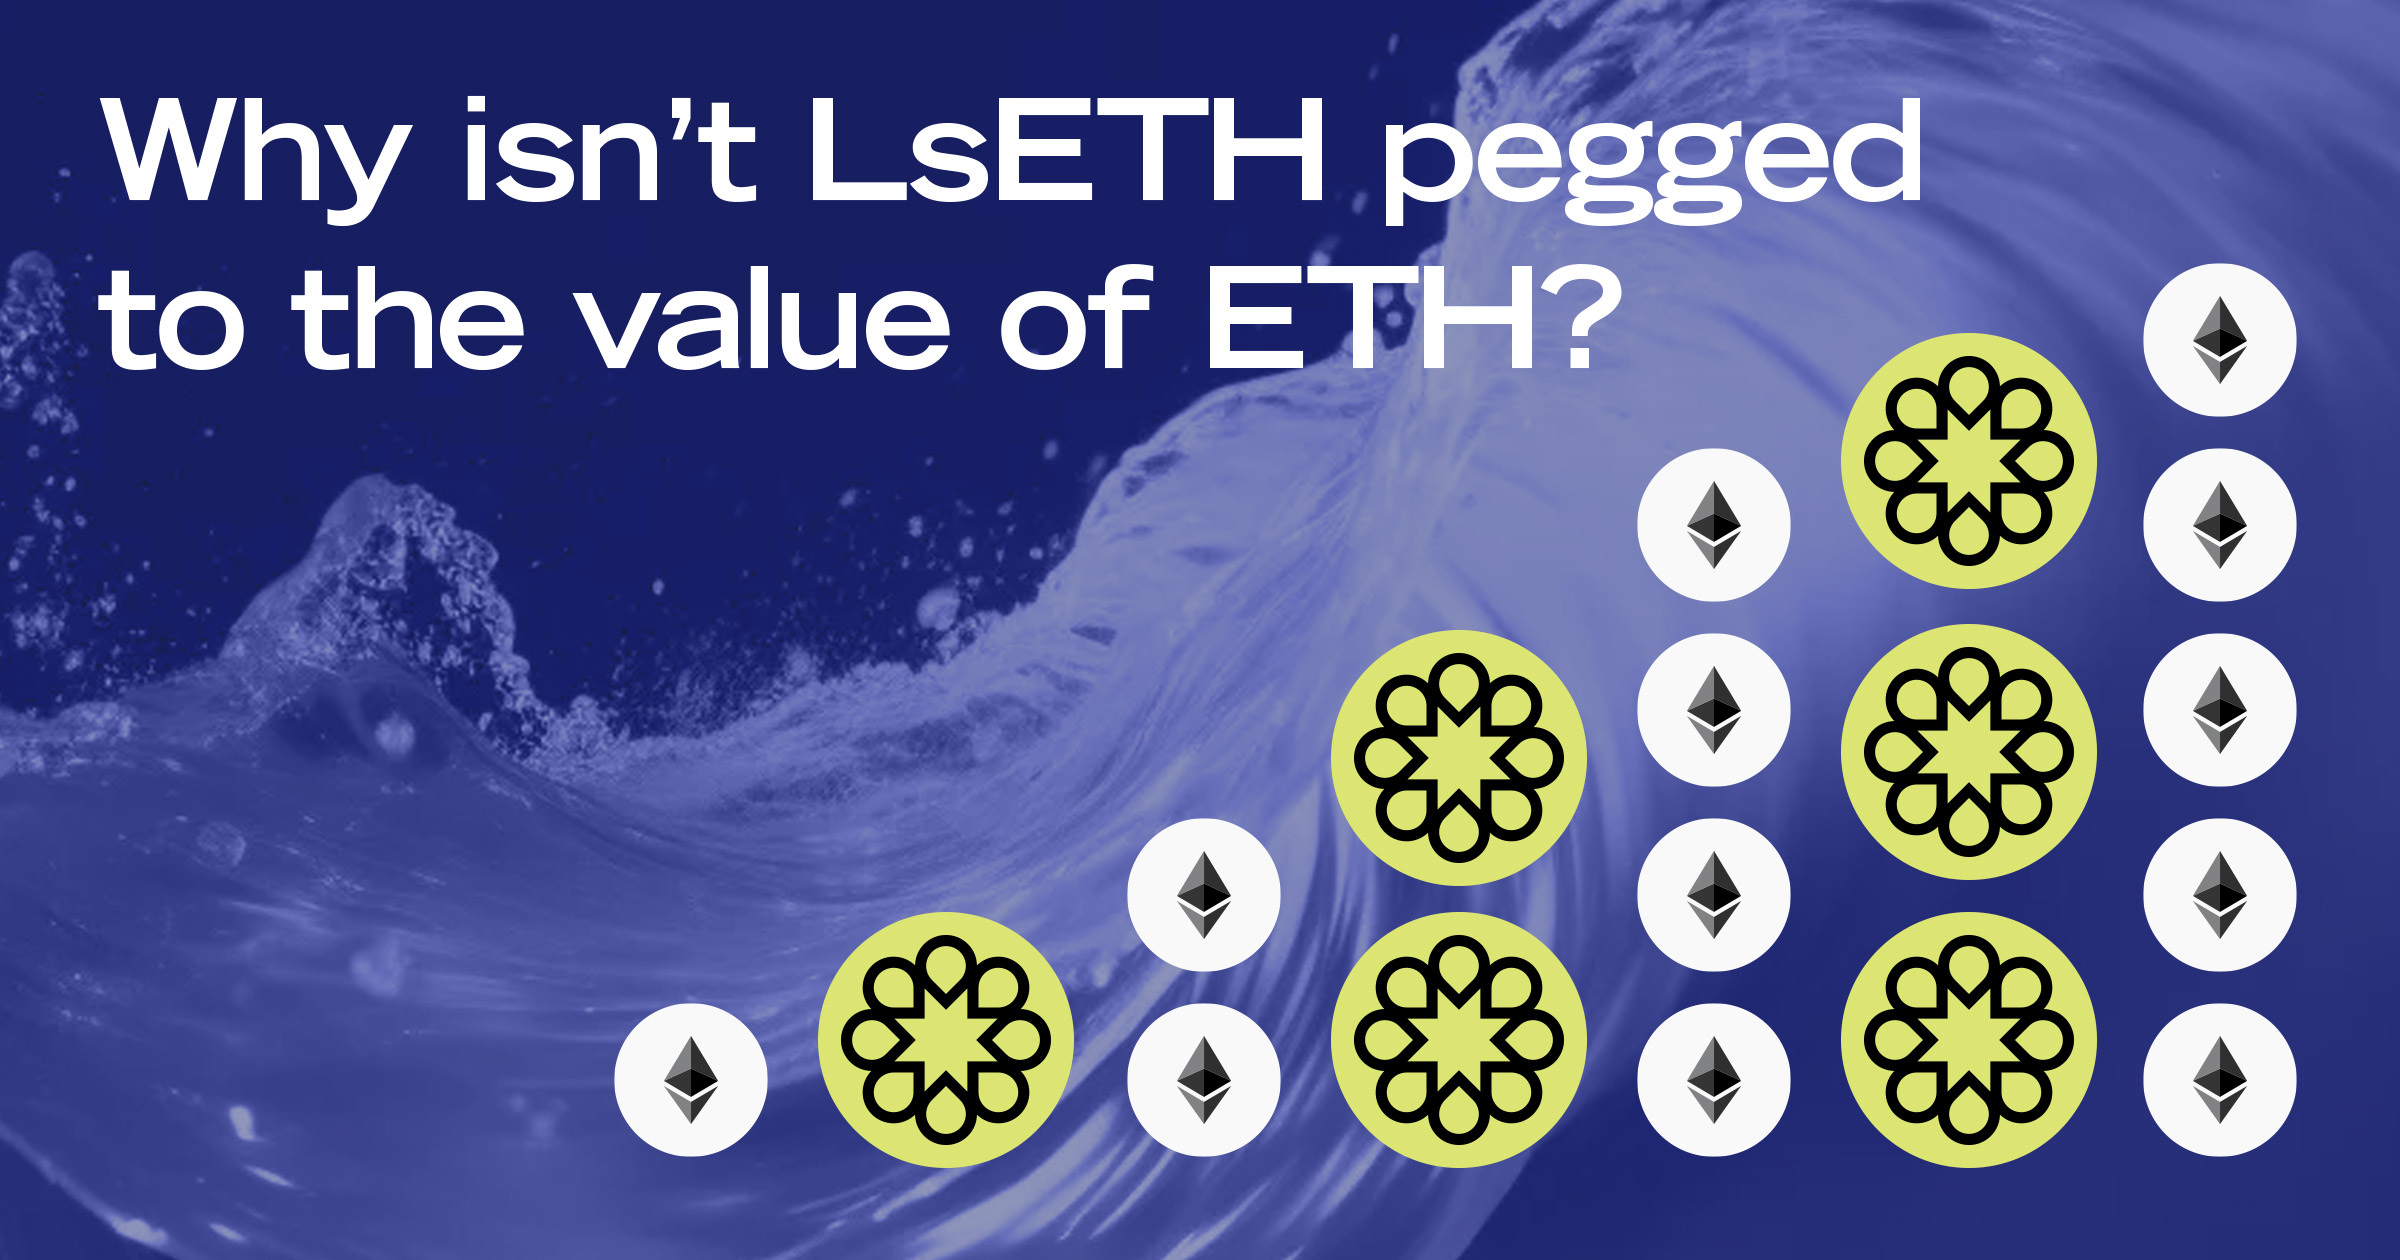 Diving into why the value of LsETH isn’t pegged 1:1 to ETH 